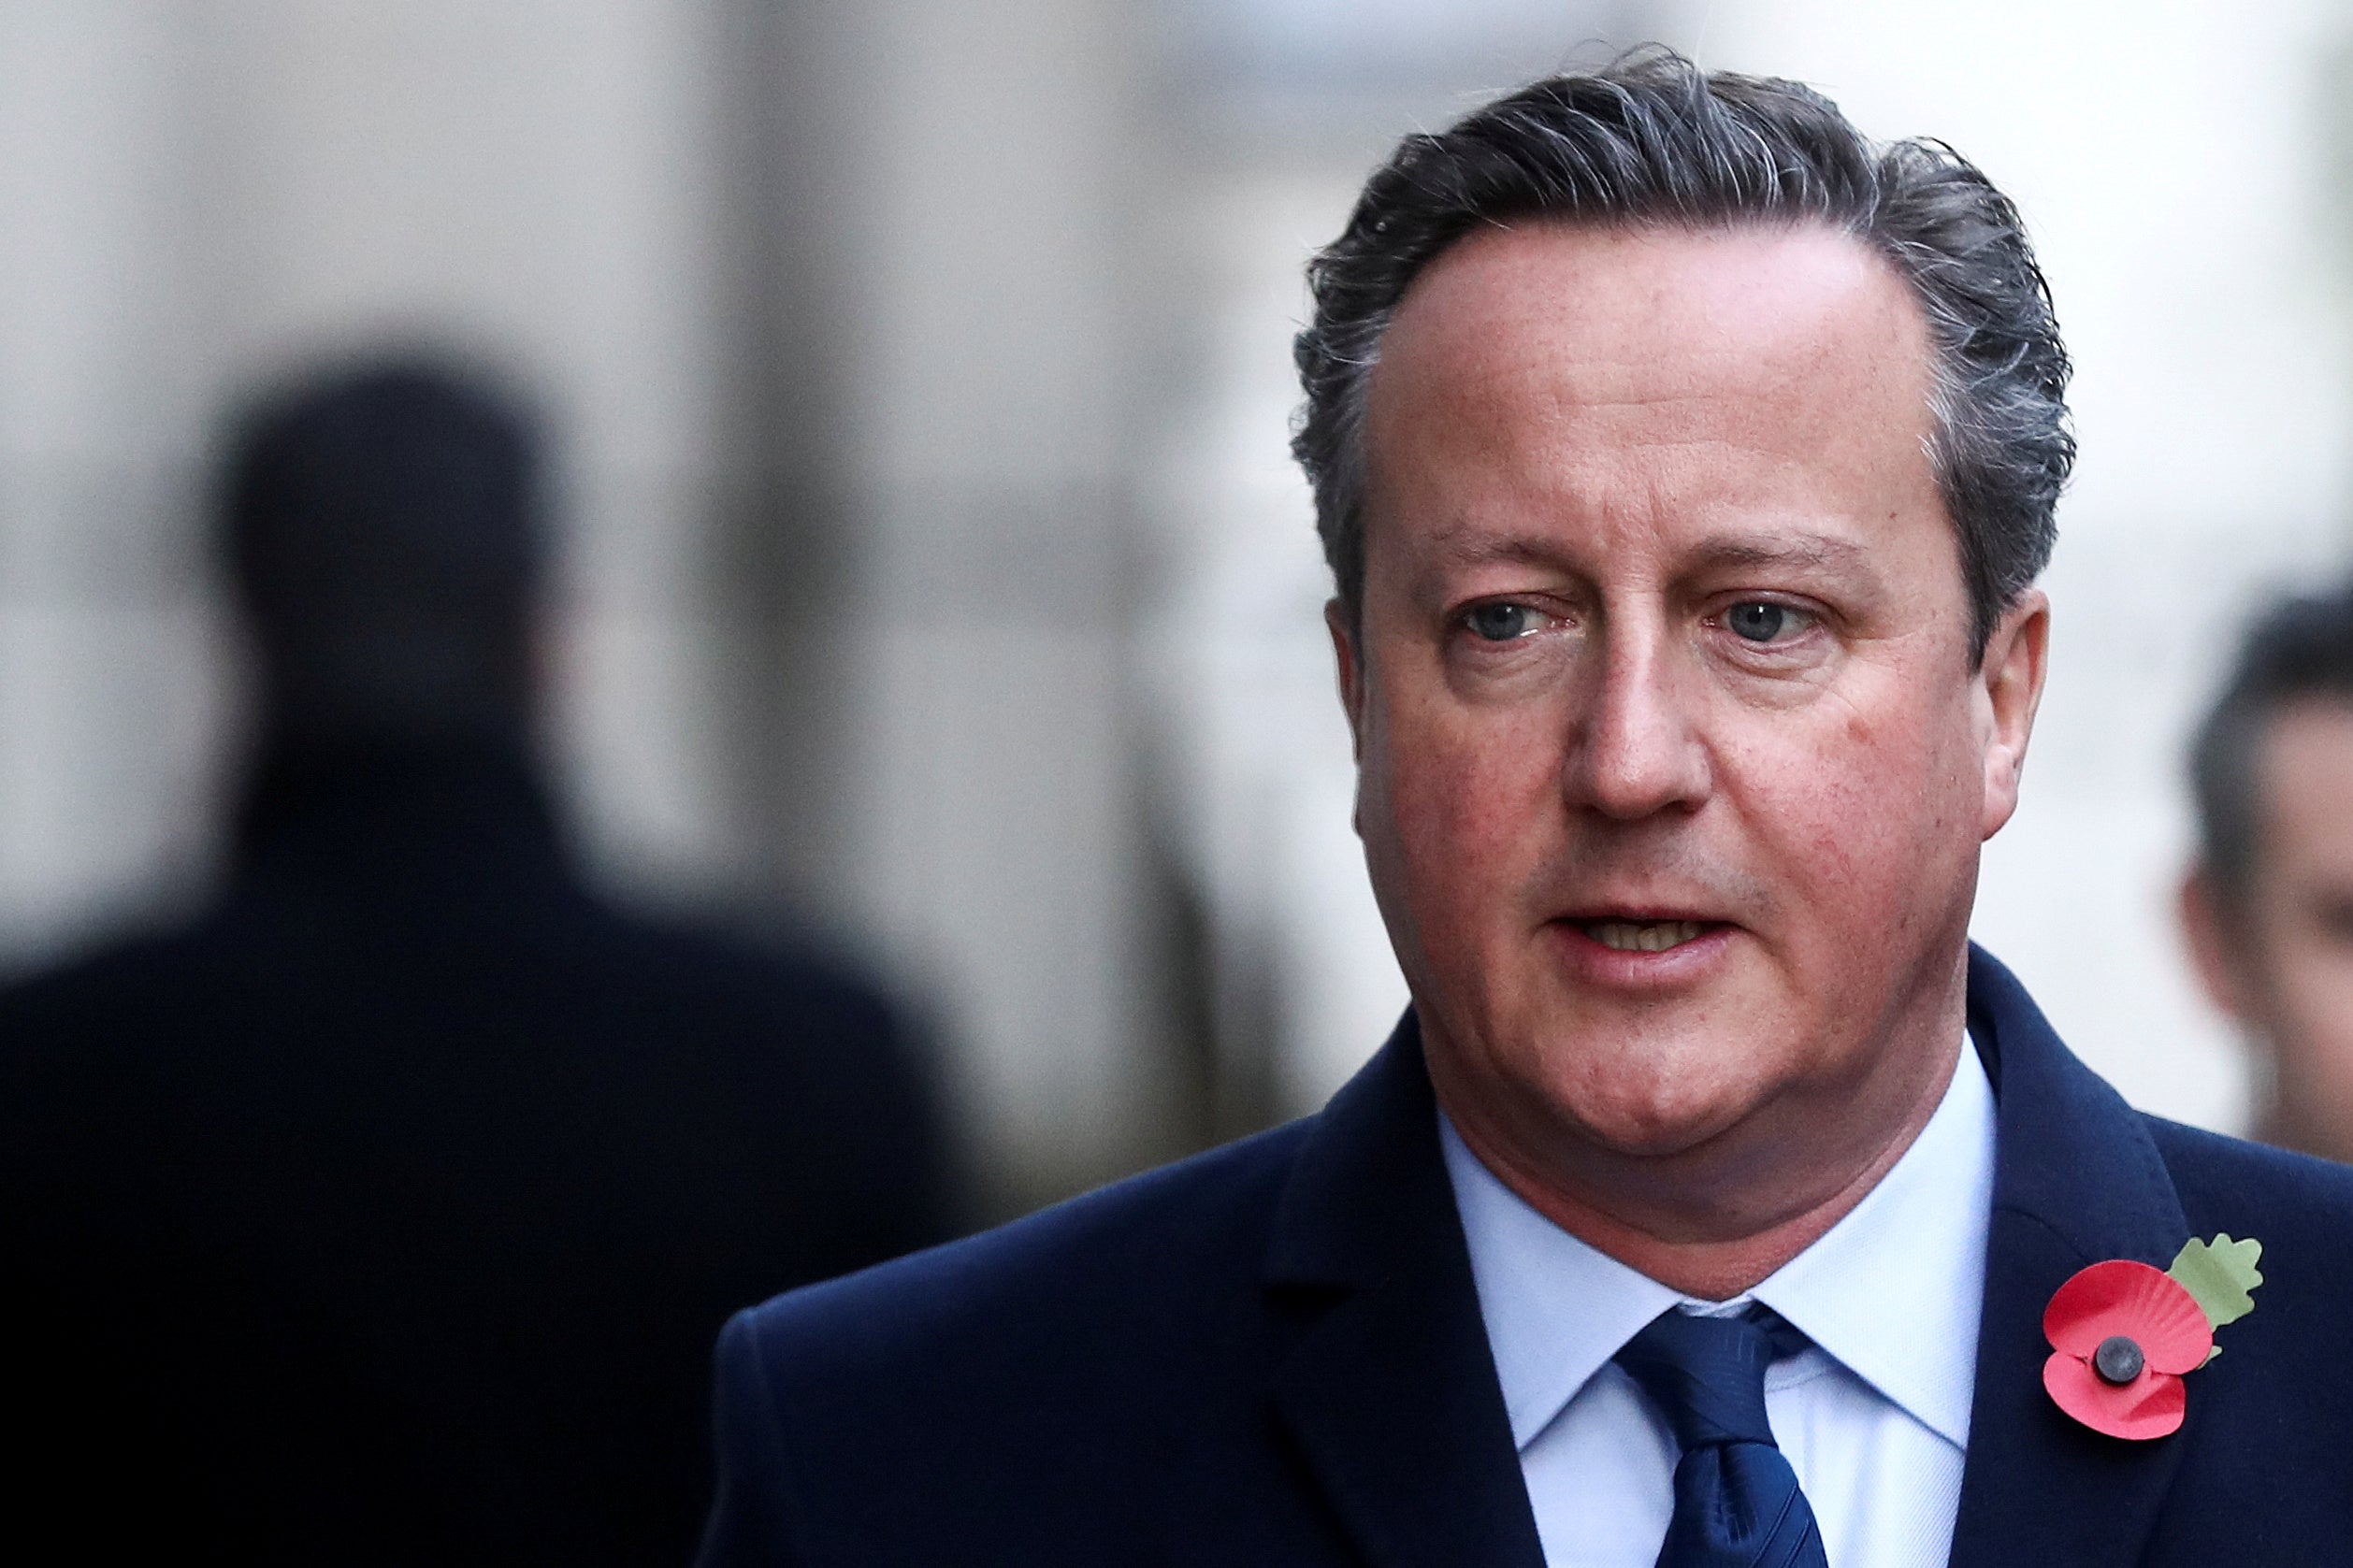 David Cameron lobbied Greensill to access publicly guaranteed funds